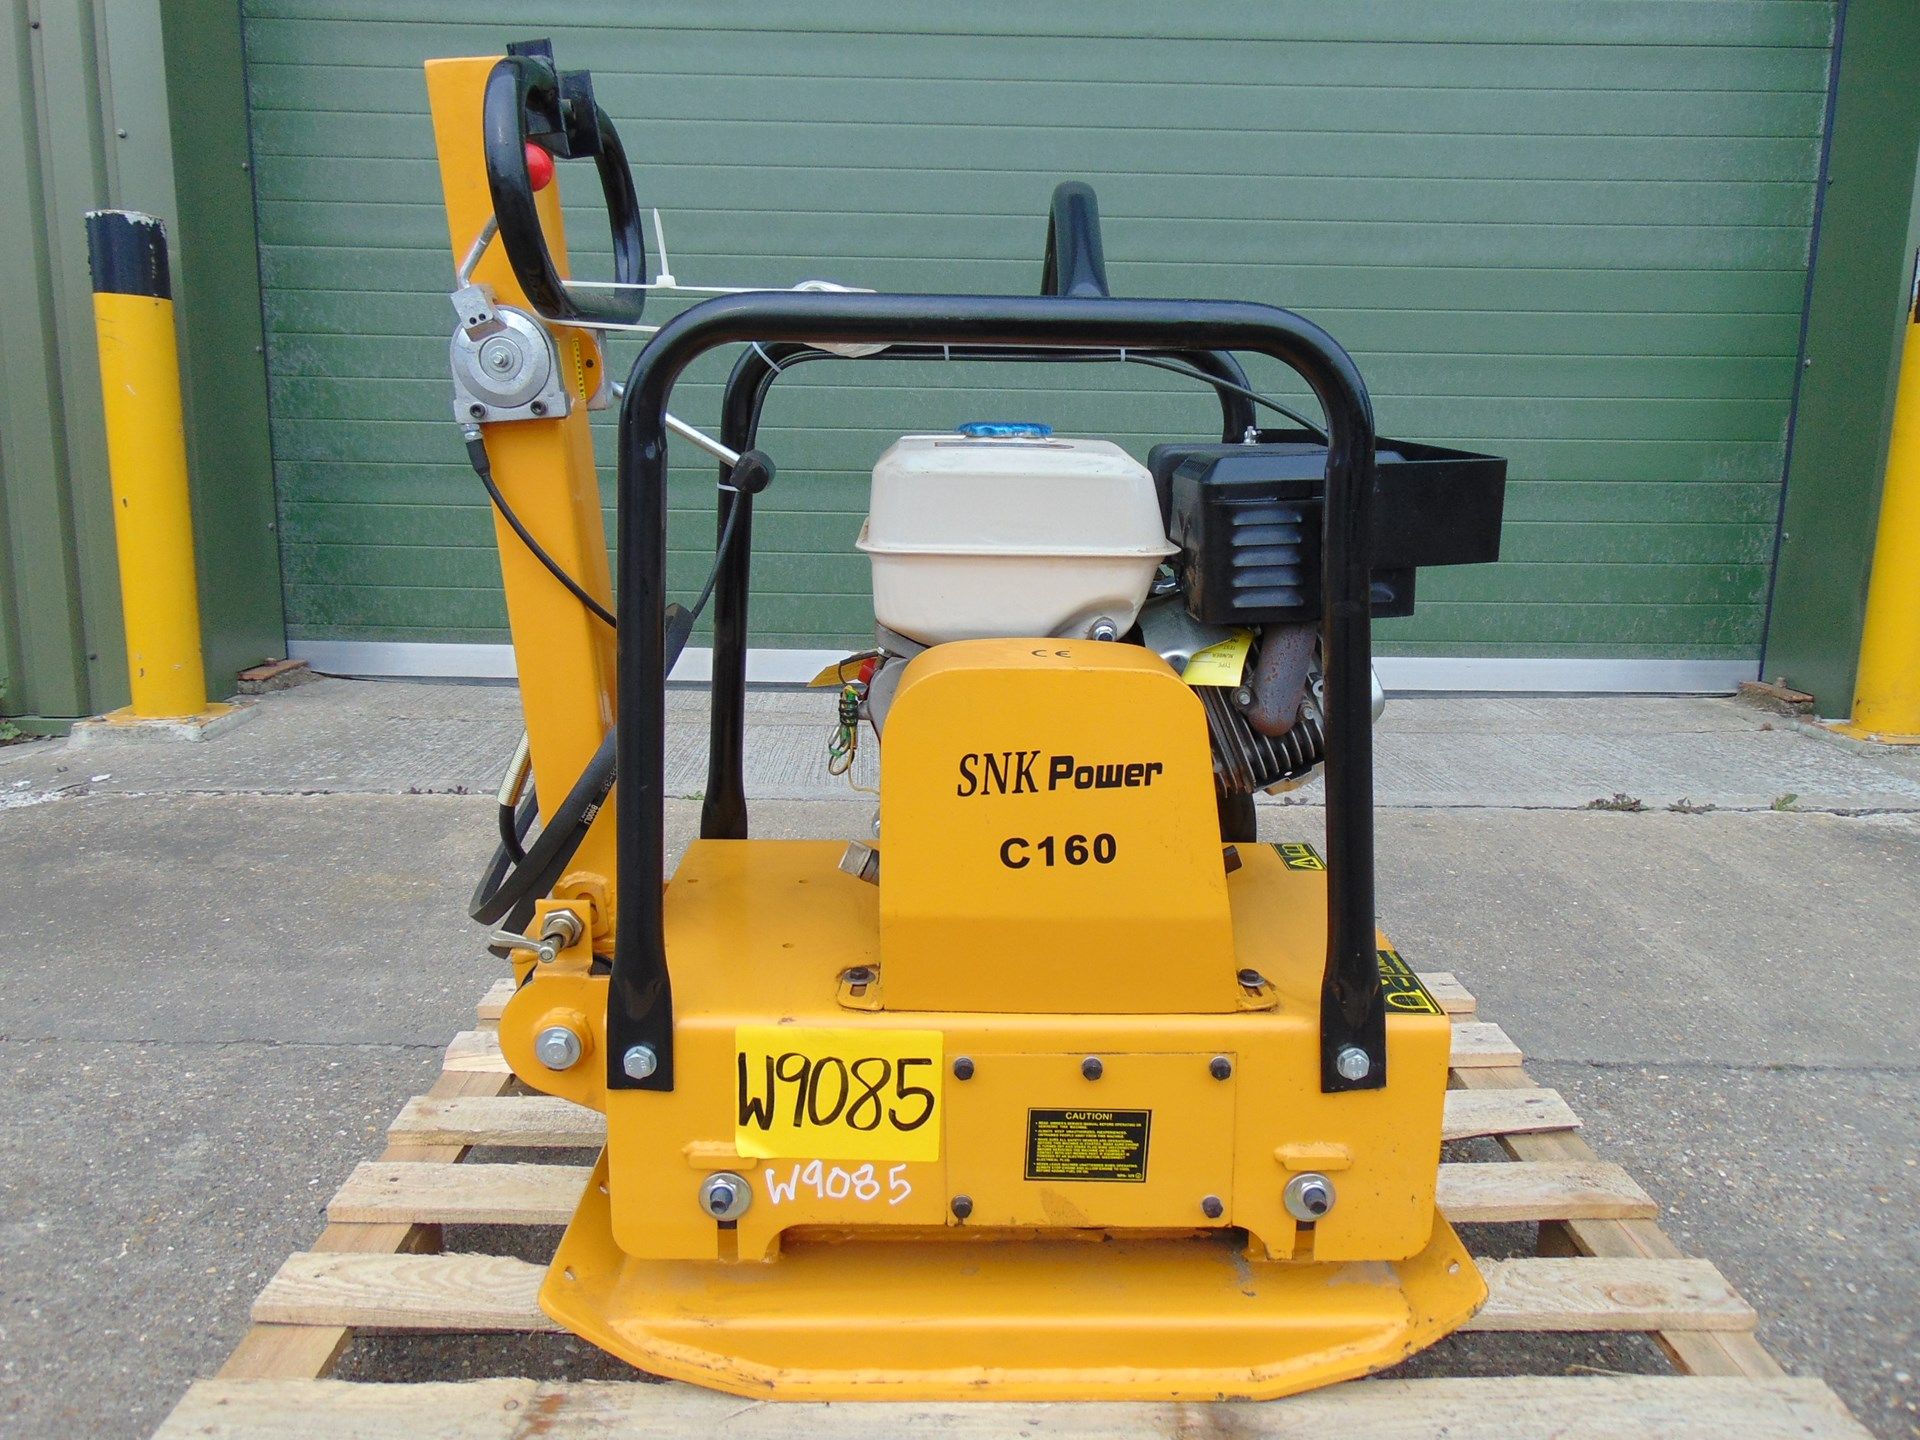 New & Unused SNK Power C160 Petrol Powered Compaction Wacker Plate